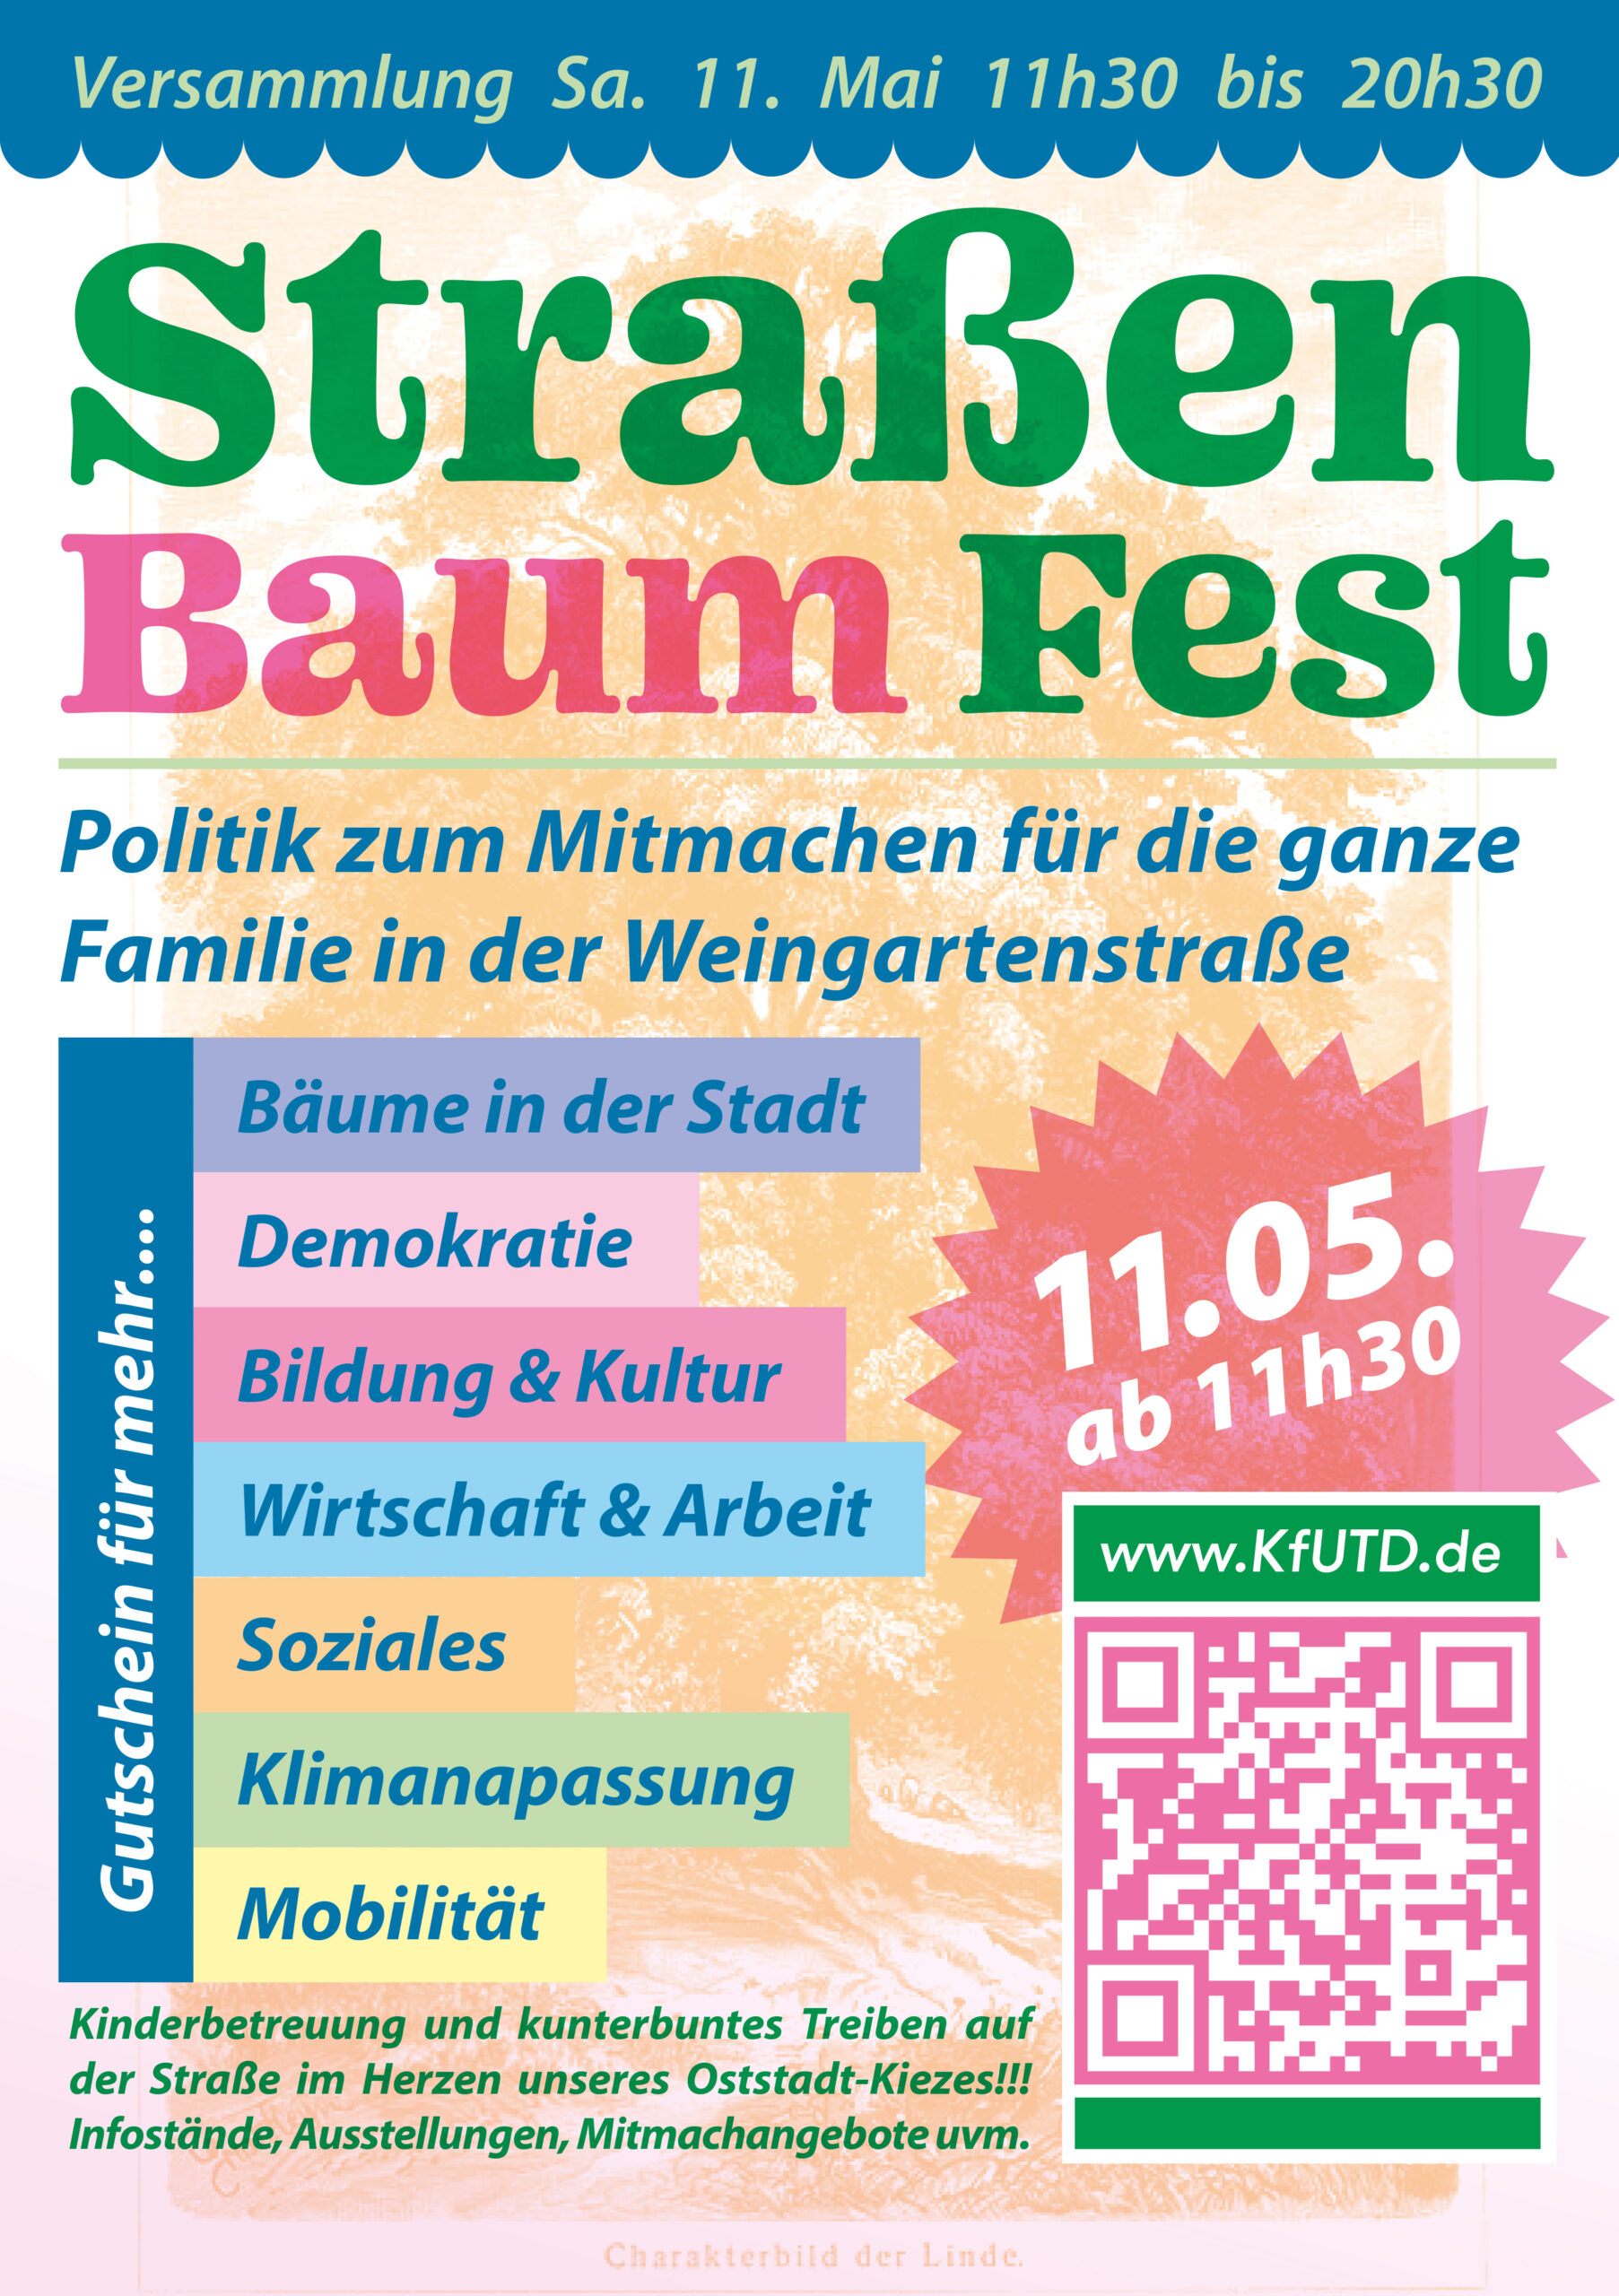 You are currently viewing Programm – Straßen-Baum-Fest